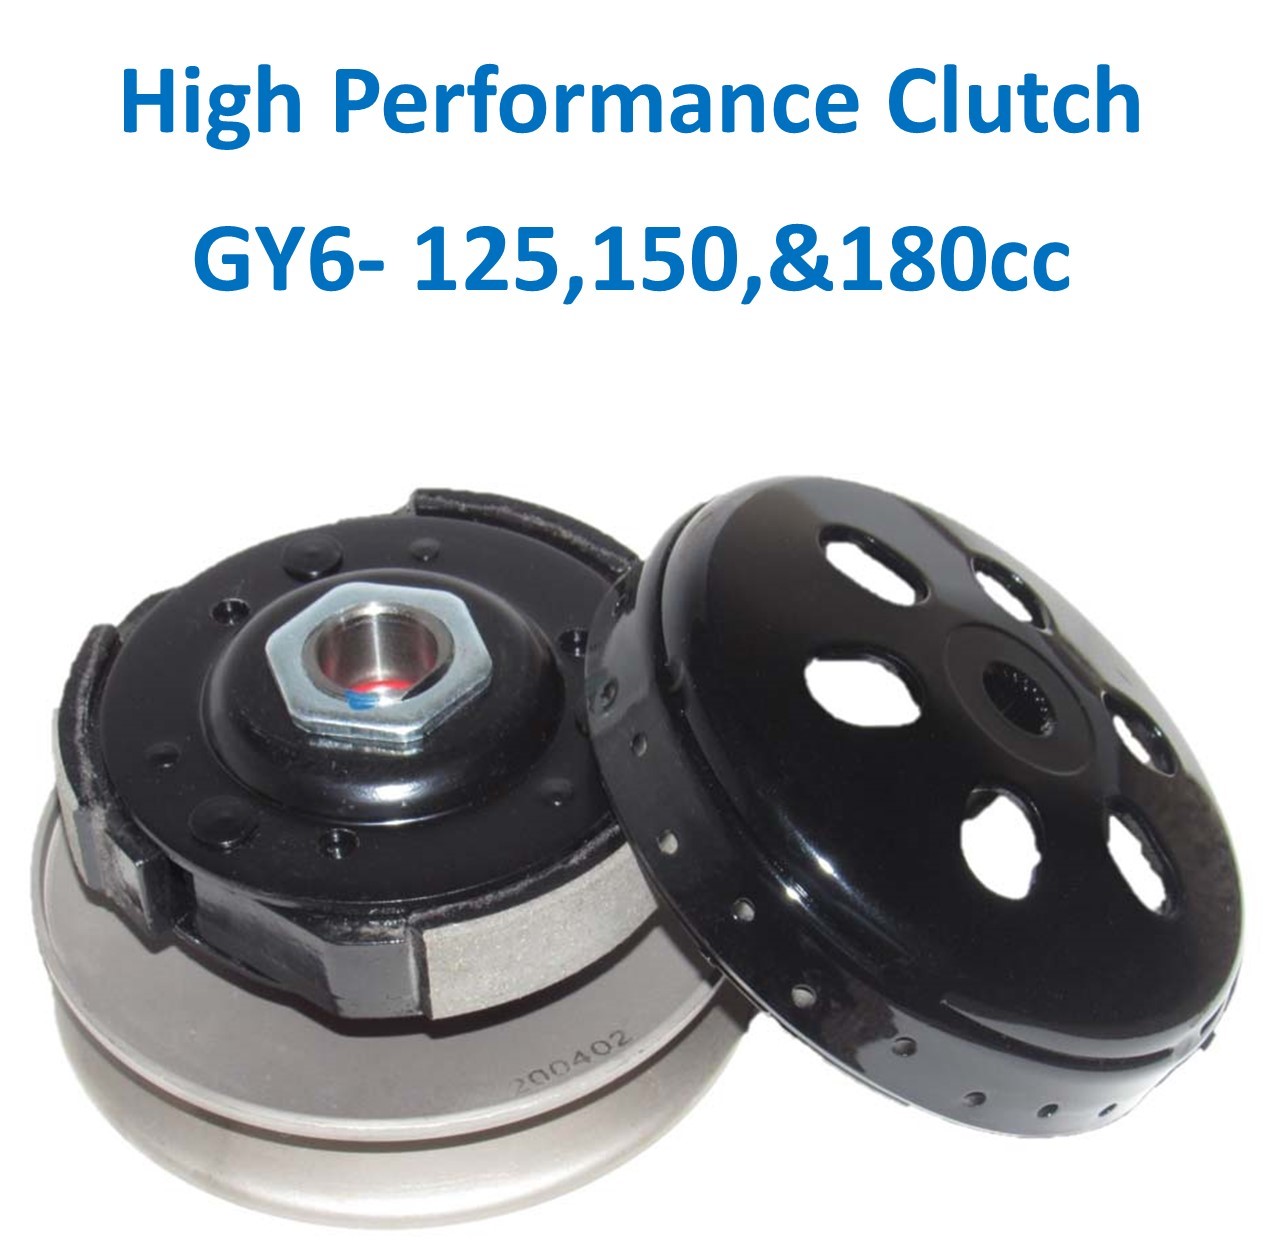 High Performance Clutch GY6-125,150,180 Fits Scooters, ATVs, GoKarts. Great off the line performance. Splines = 19